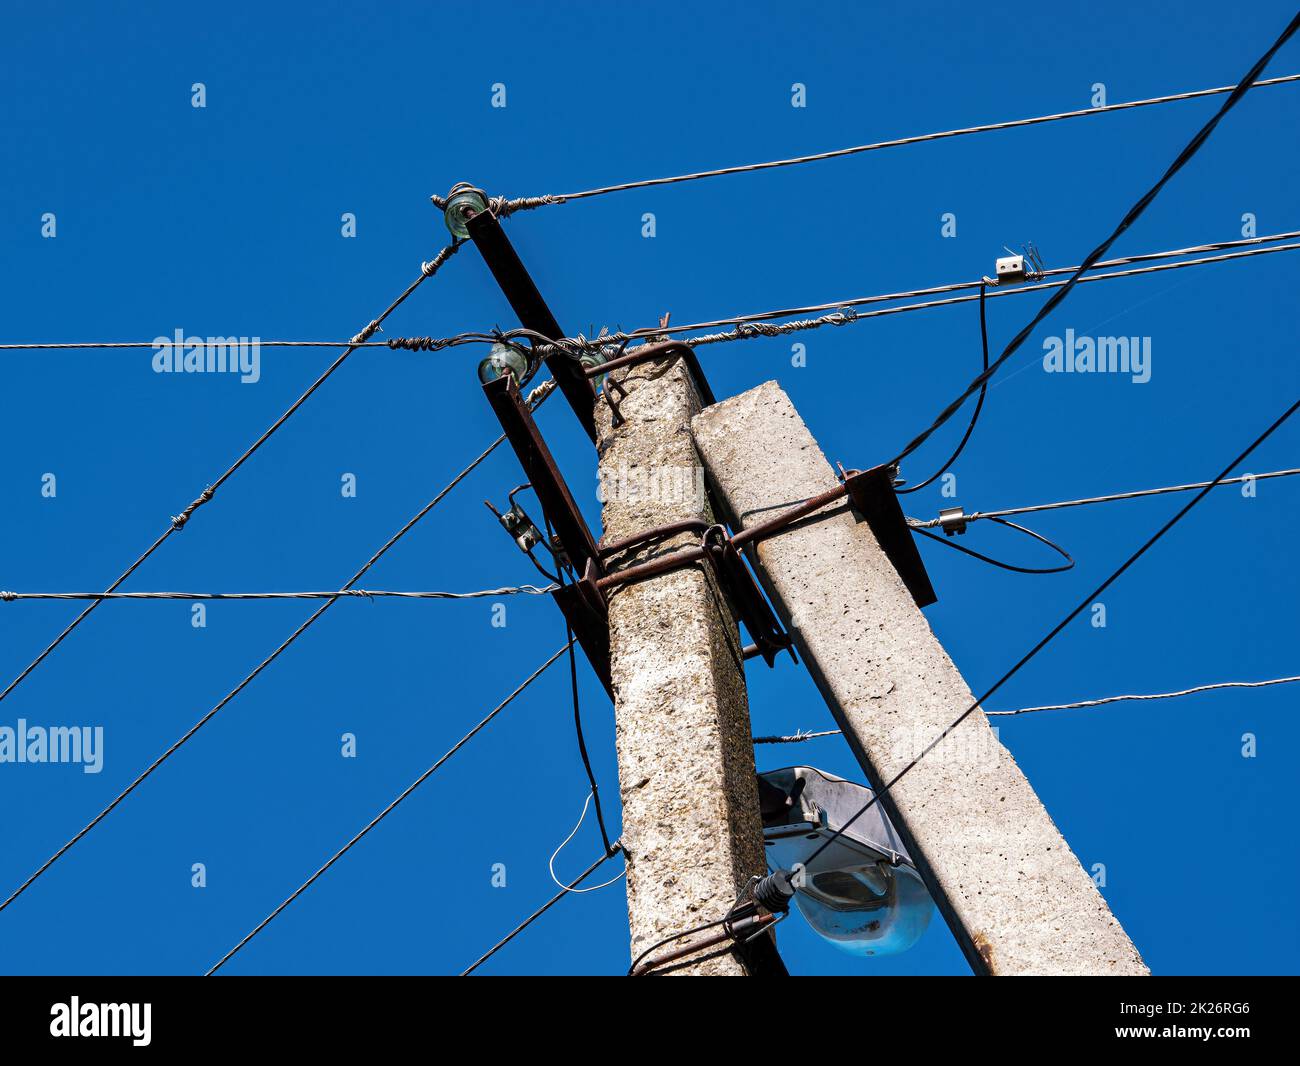 Concrete pole with electric wires against the blue sky. Stock Photo